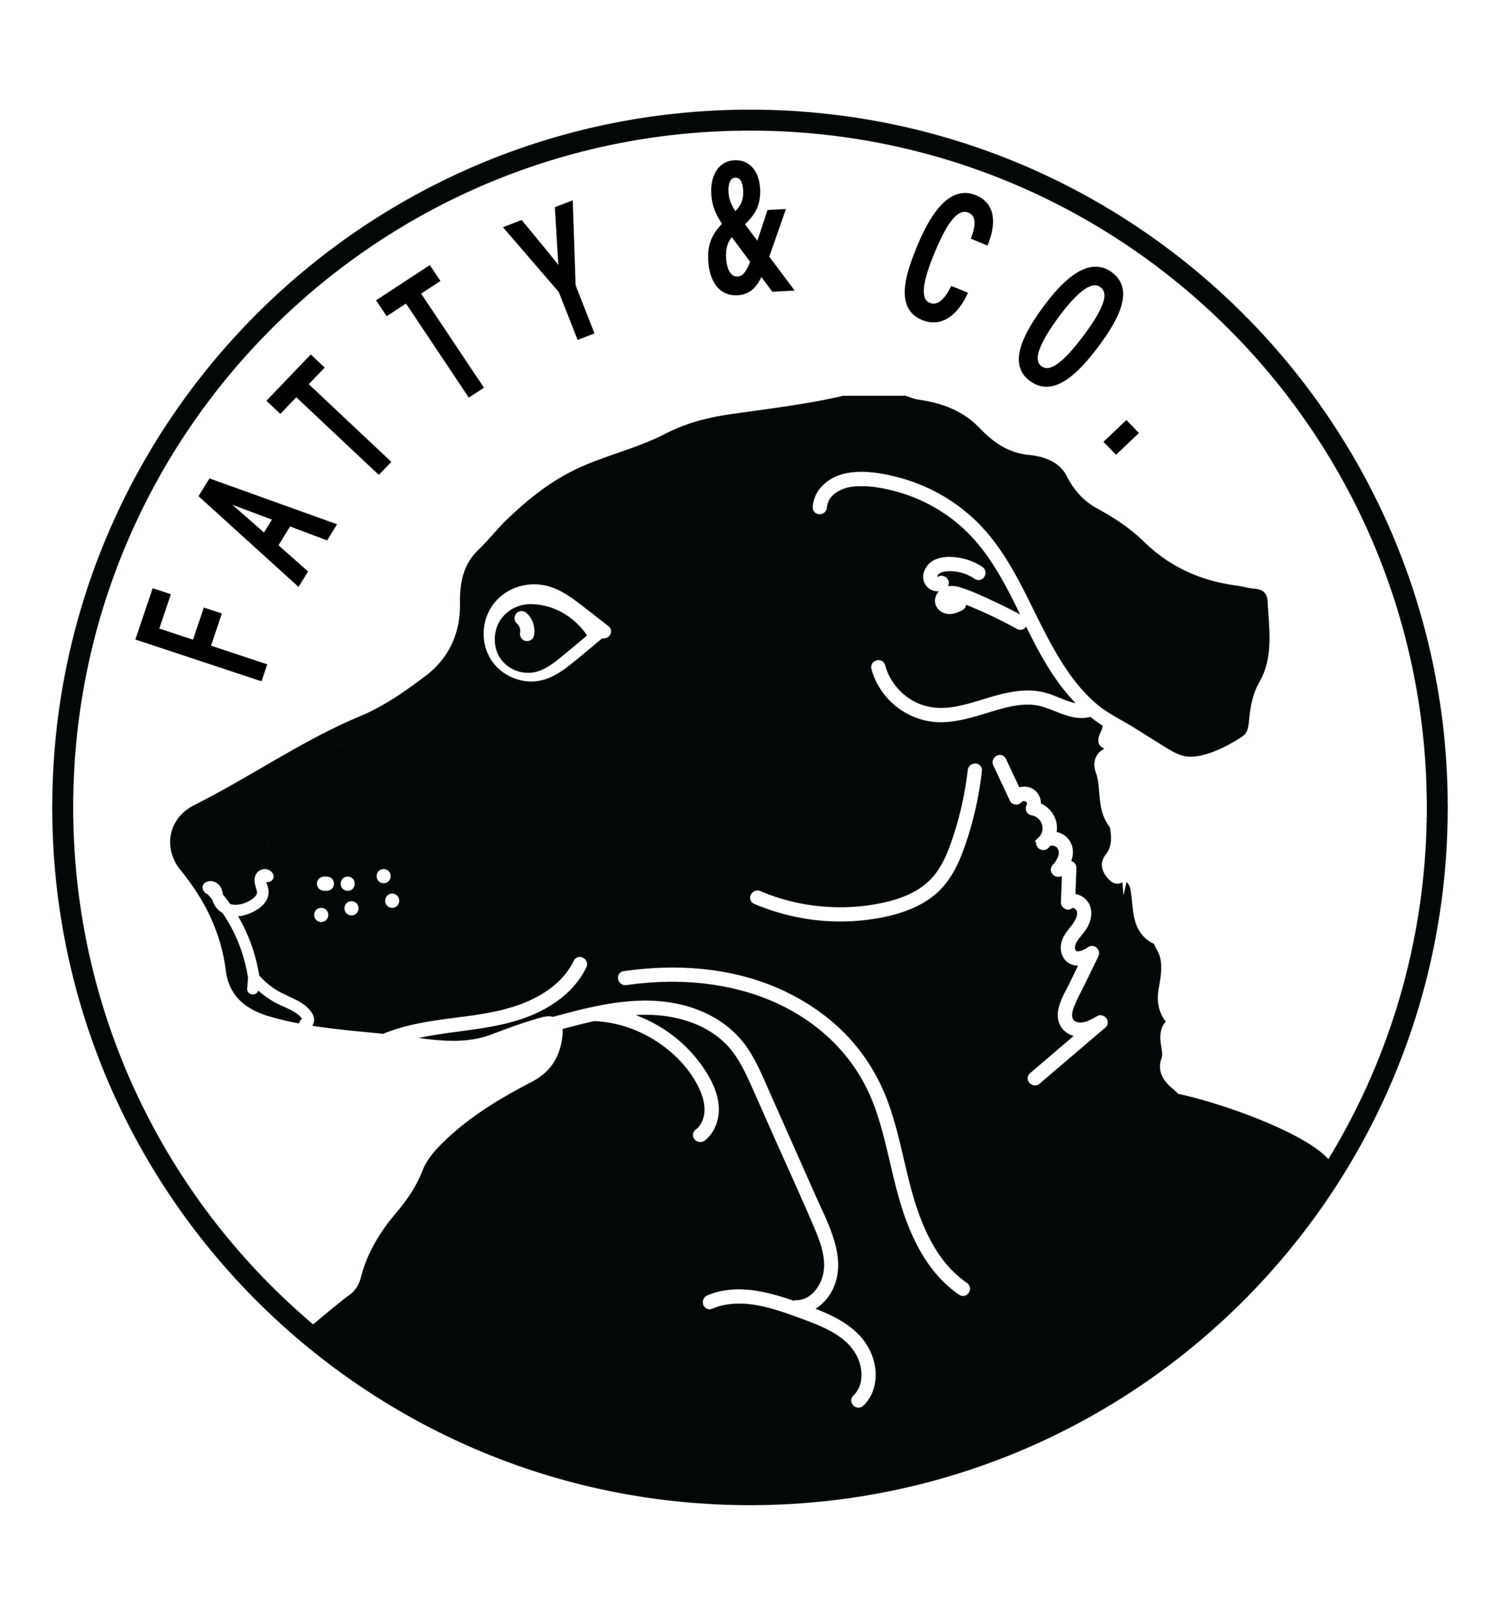 Fatty &amp; Co Productions